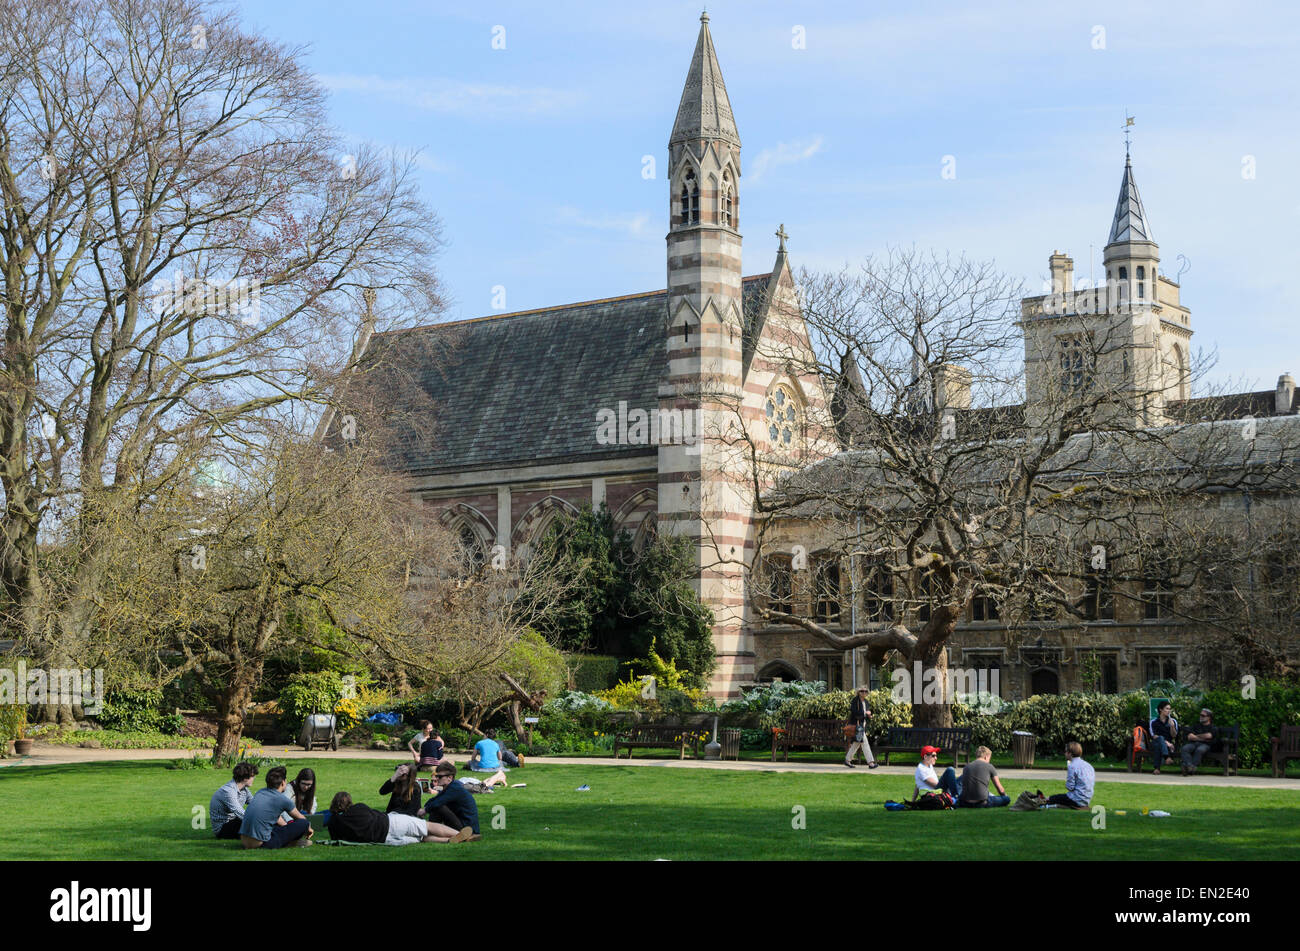 Students relaxing in the Garden Quadrangle, Balliol College, University of Oxford, Oxford, England, UK. Stock Photo